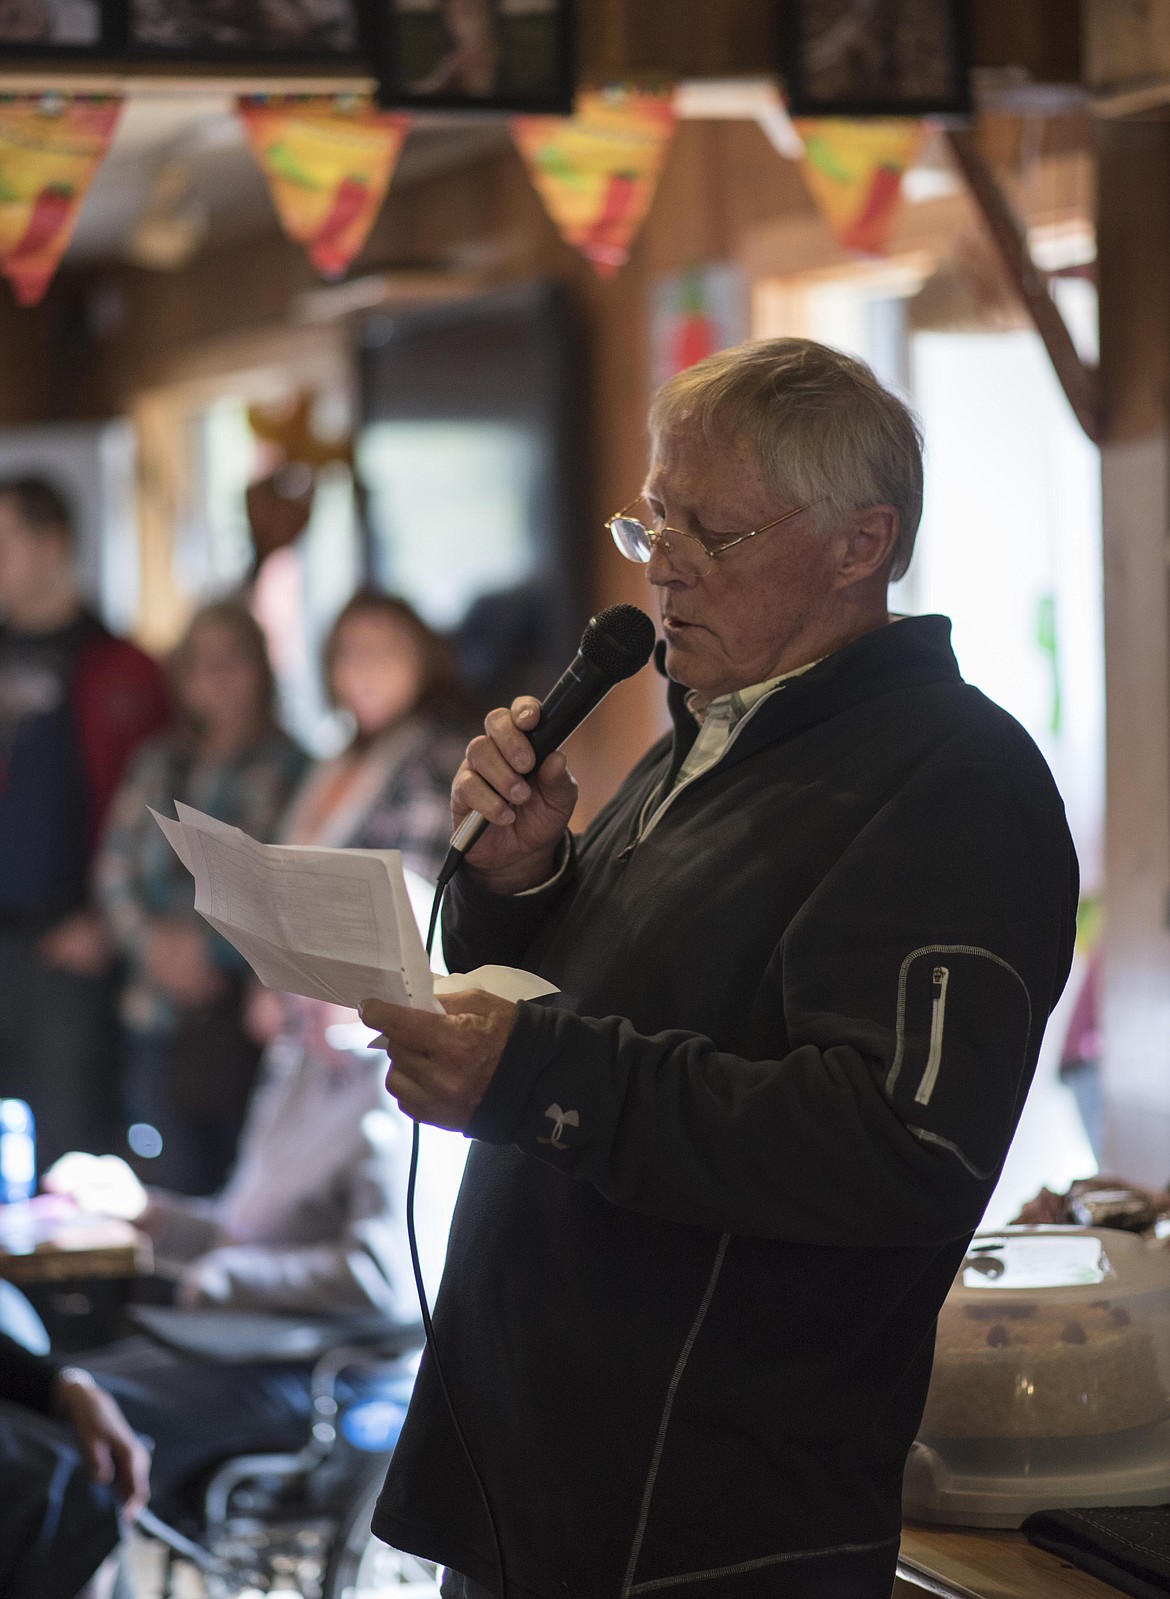 Jim Mayo reads off the names of donators to Wings before the live action begins, Saturday at the Yaak River Tavern &amp; Mercantile. (Luke Hollister/The Western News)